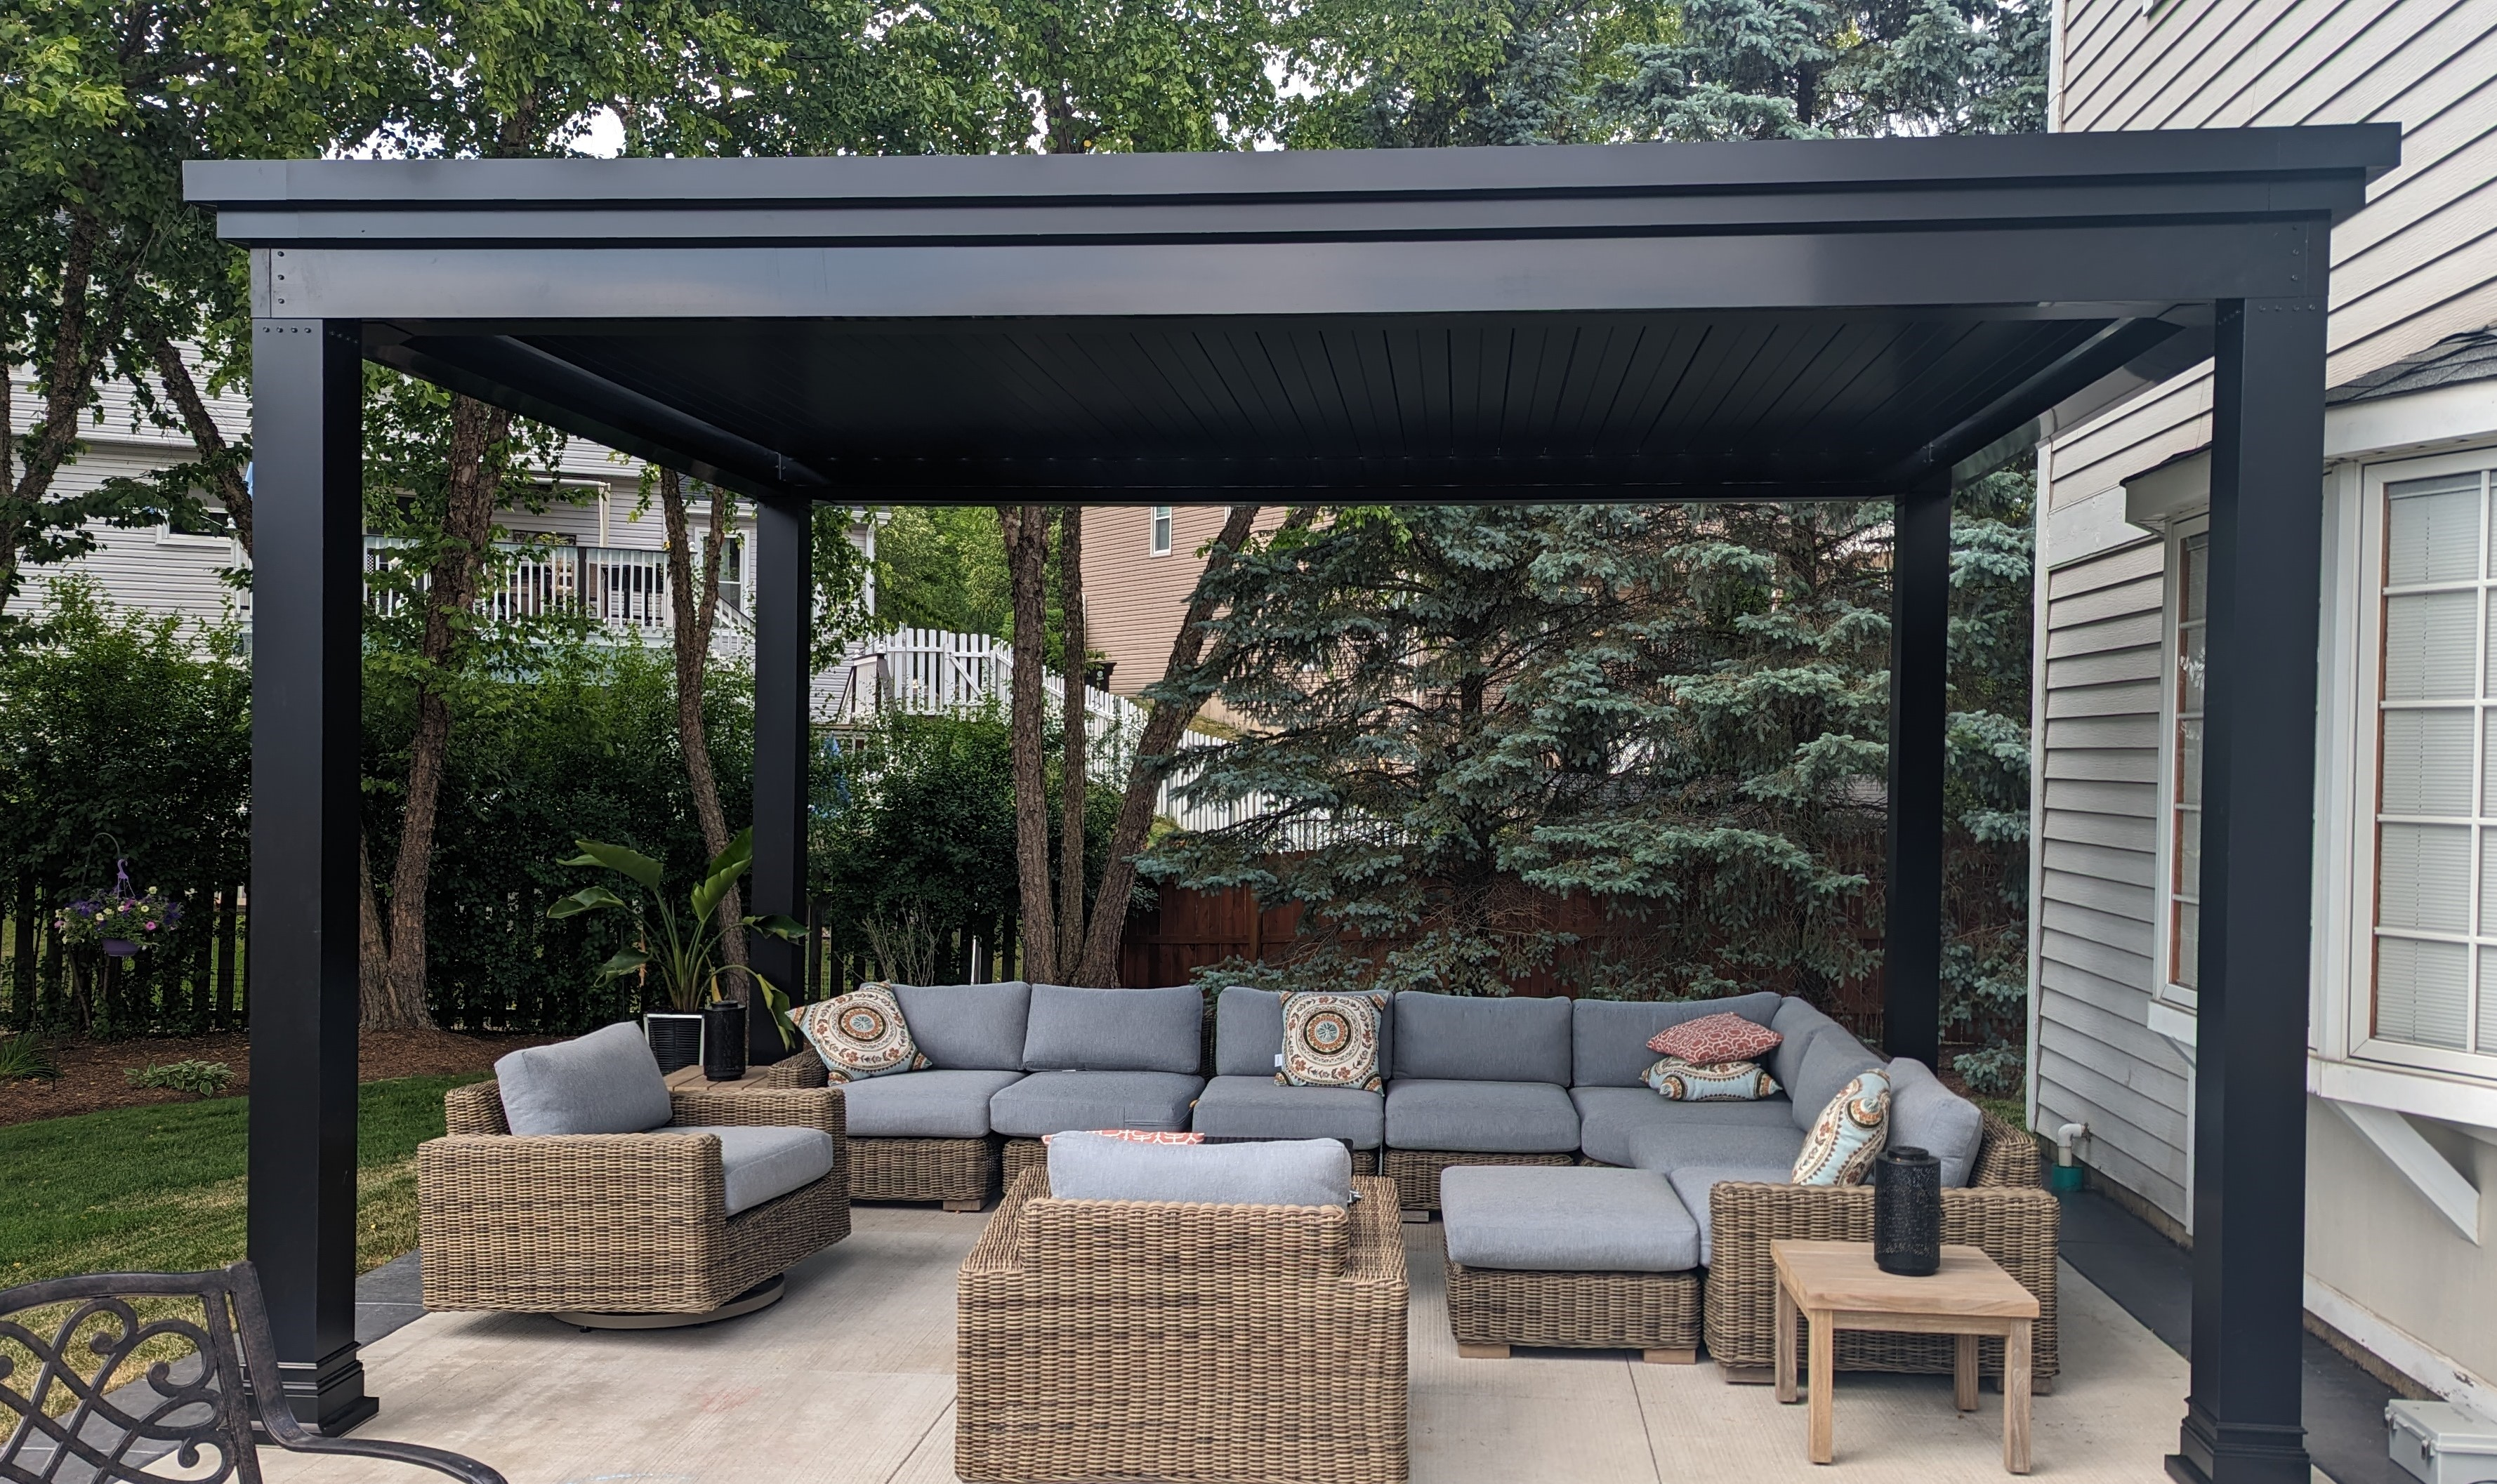 Outdoor space with seating areas